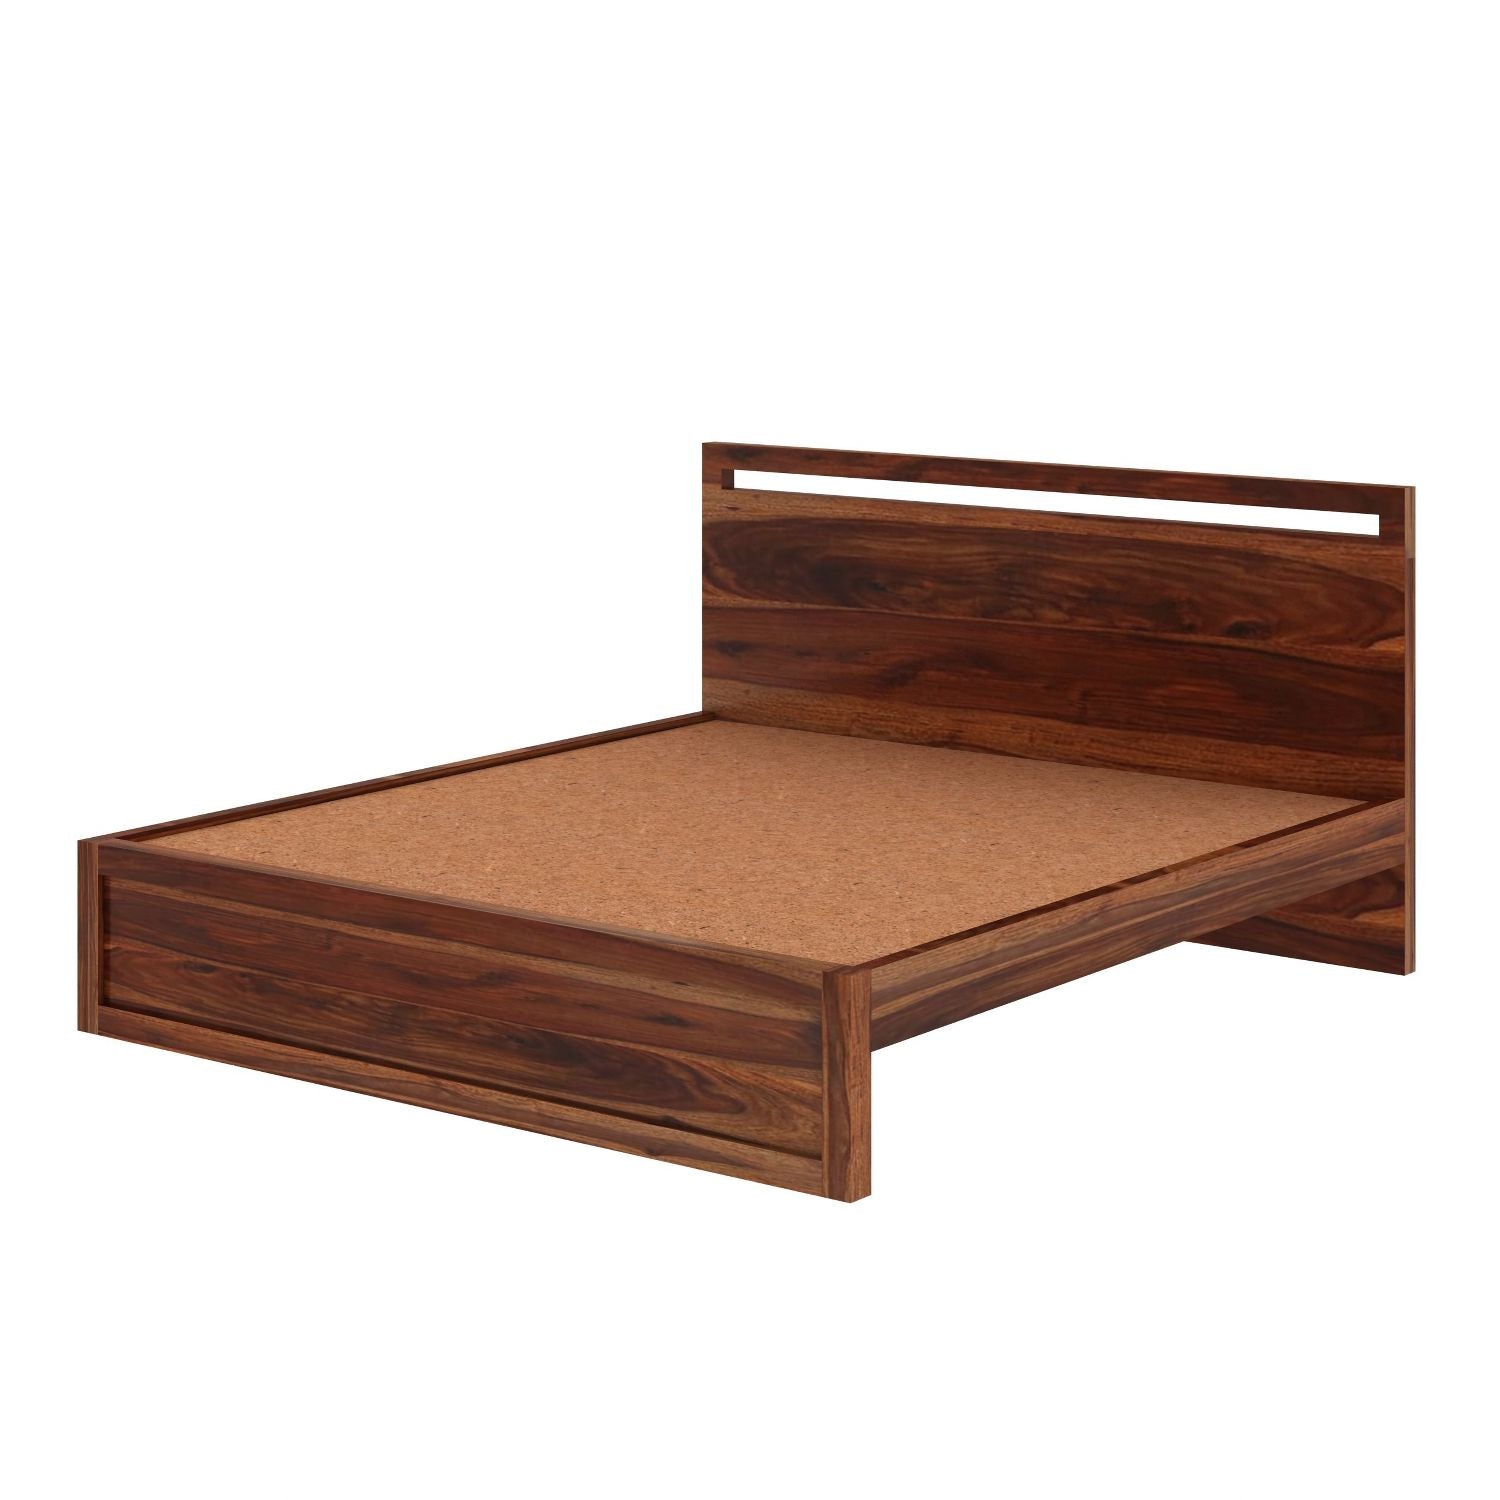 Livinn Solid Sheesham Wood Bed Without Storage (Queen Size, Natural Finish)